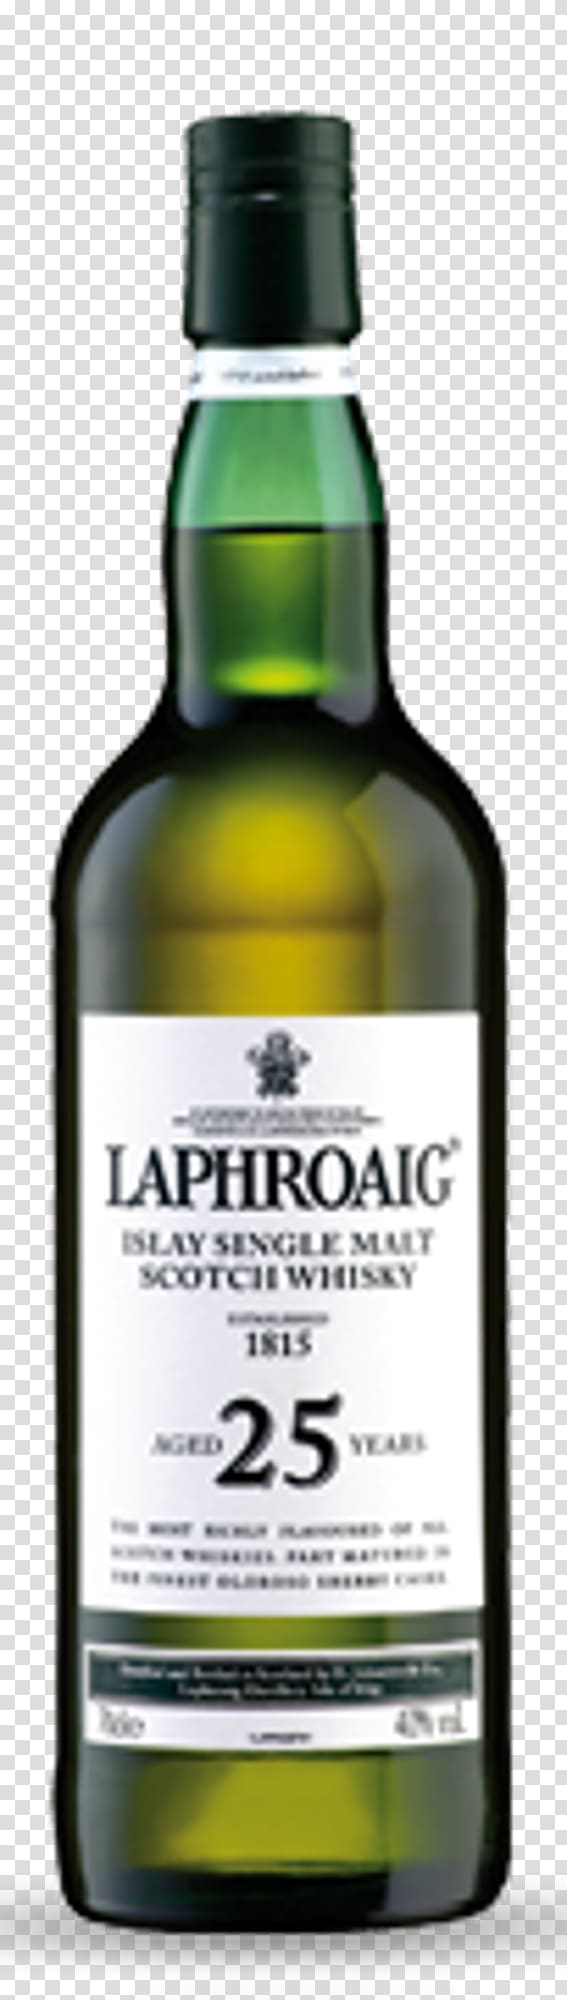 Liqueur Laphroaig Whiskey Islay whisky Glass bottle, glass transparent background PNG clipart